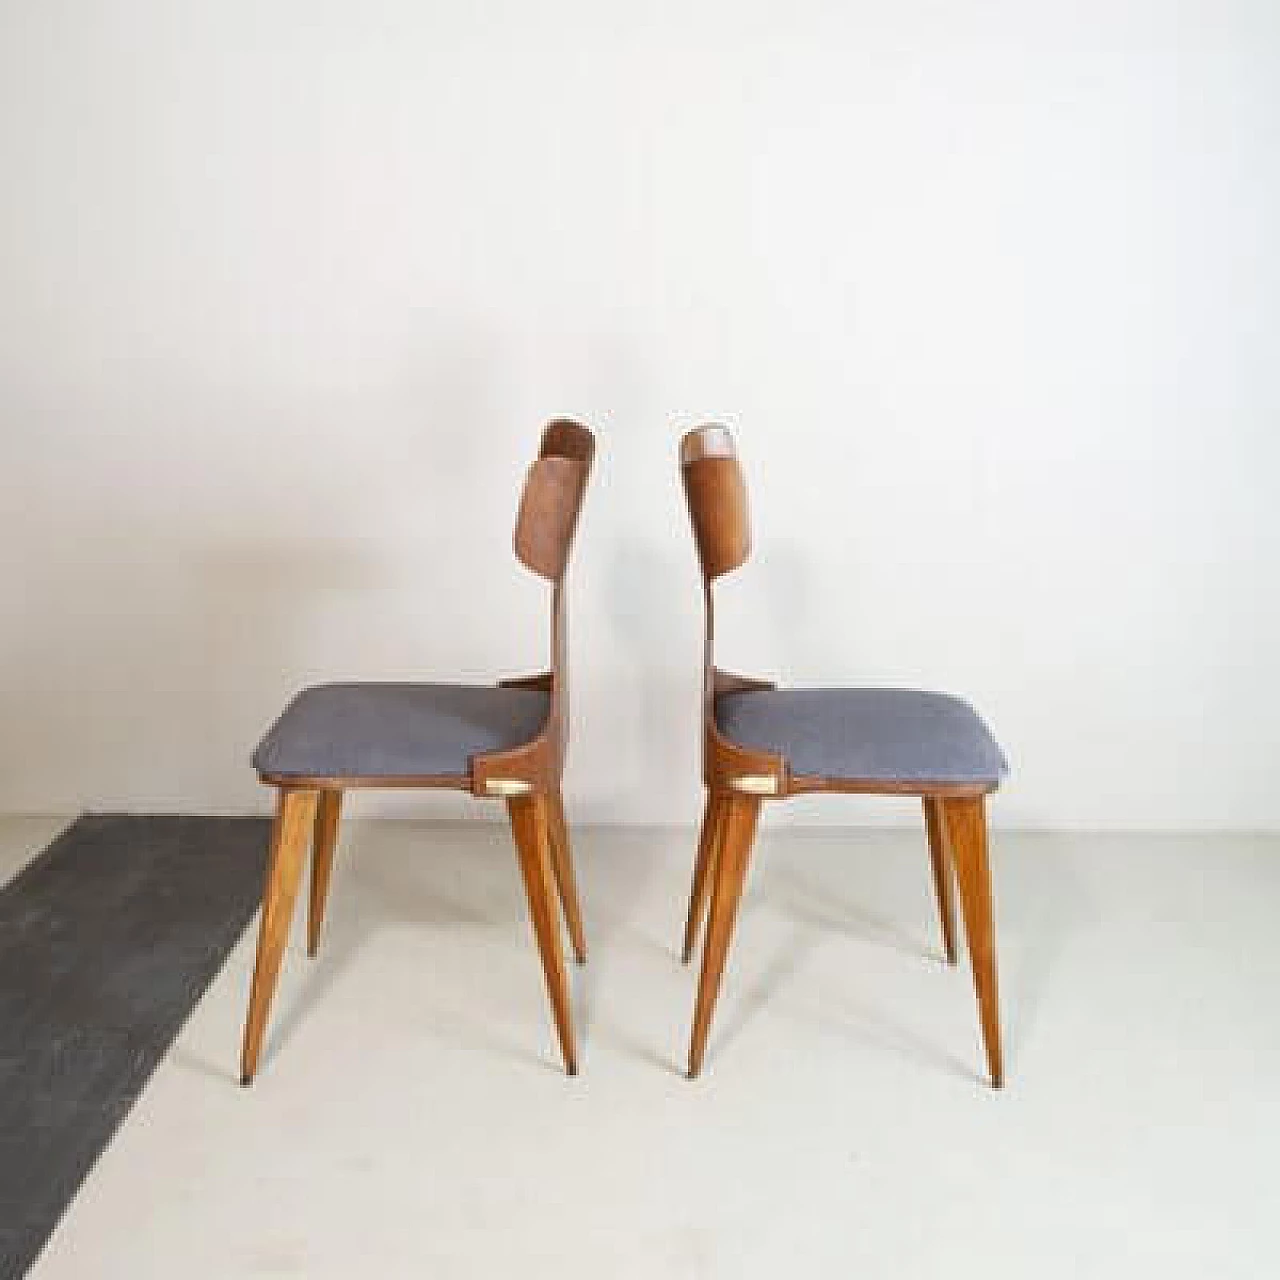 Pair of Curved Wooden Chairs by Carlo Ratti, 1950s 5